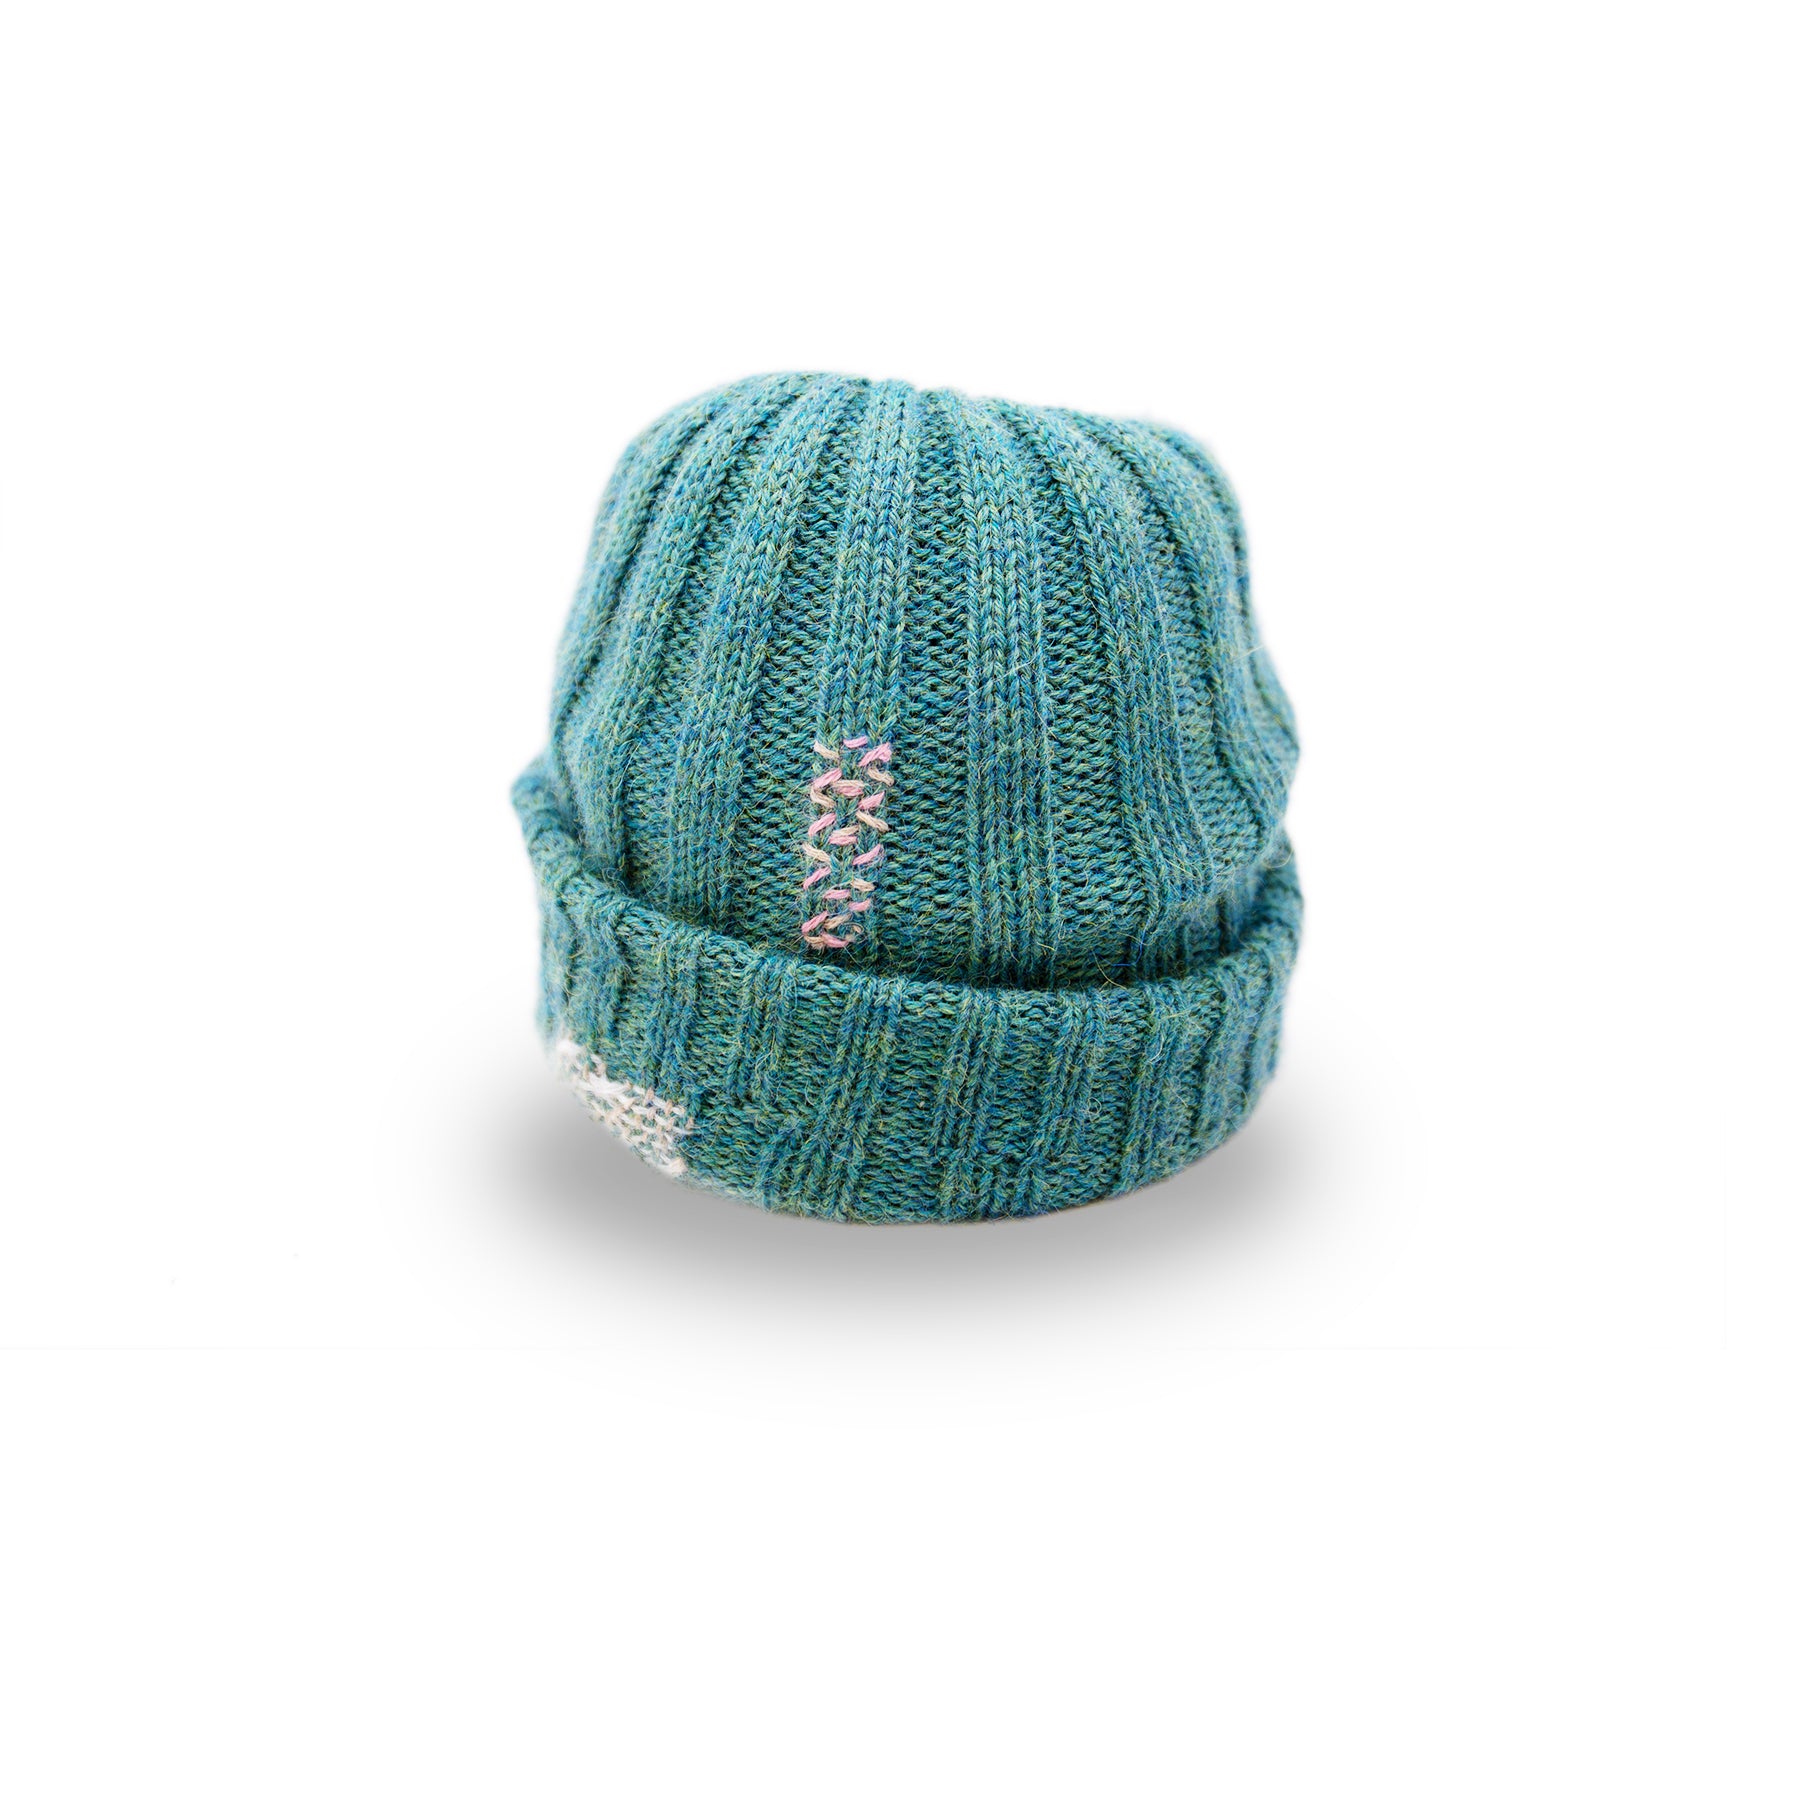 100% Baby Alpaca wool ribbed beanie in Pacific Ocean Blue  Multicolored hand-embroidered mending  Made in Los Angeles